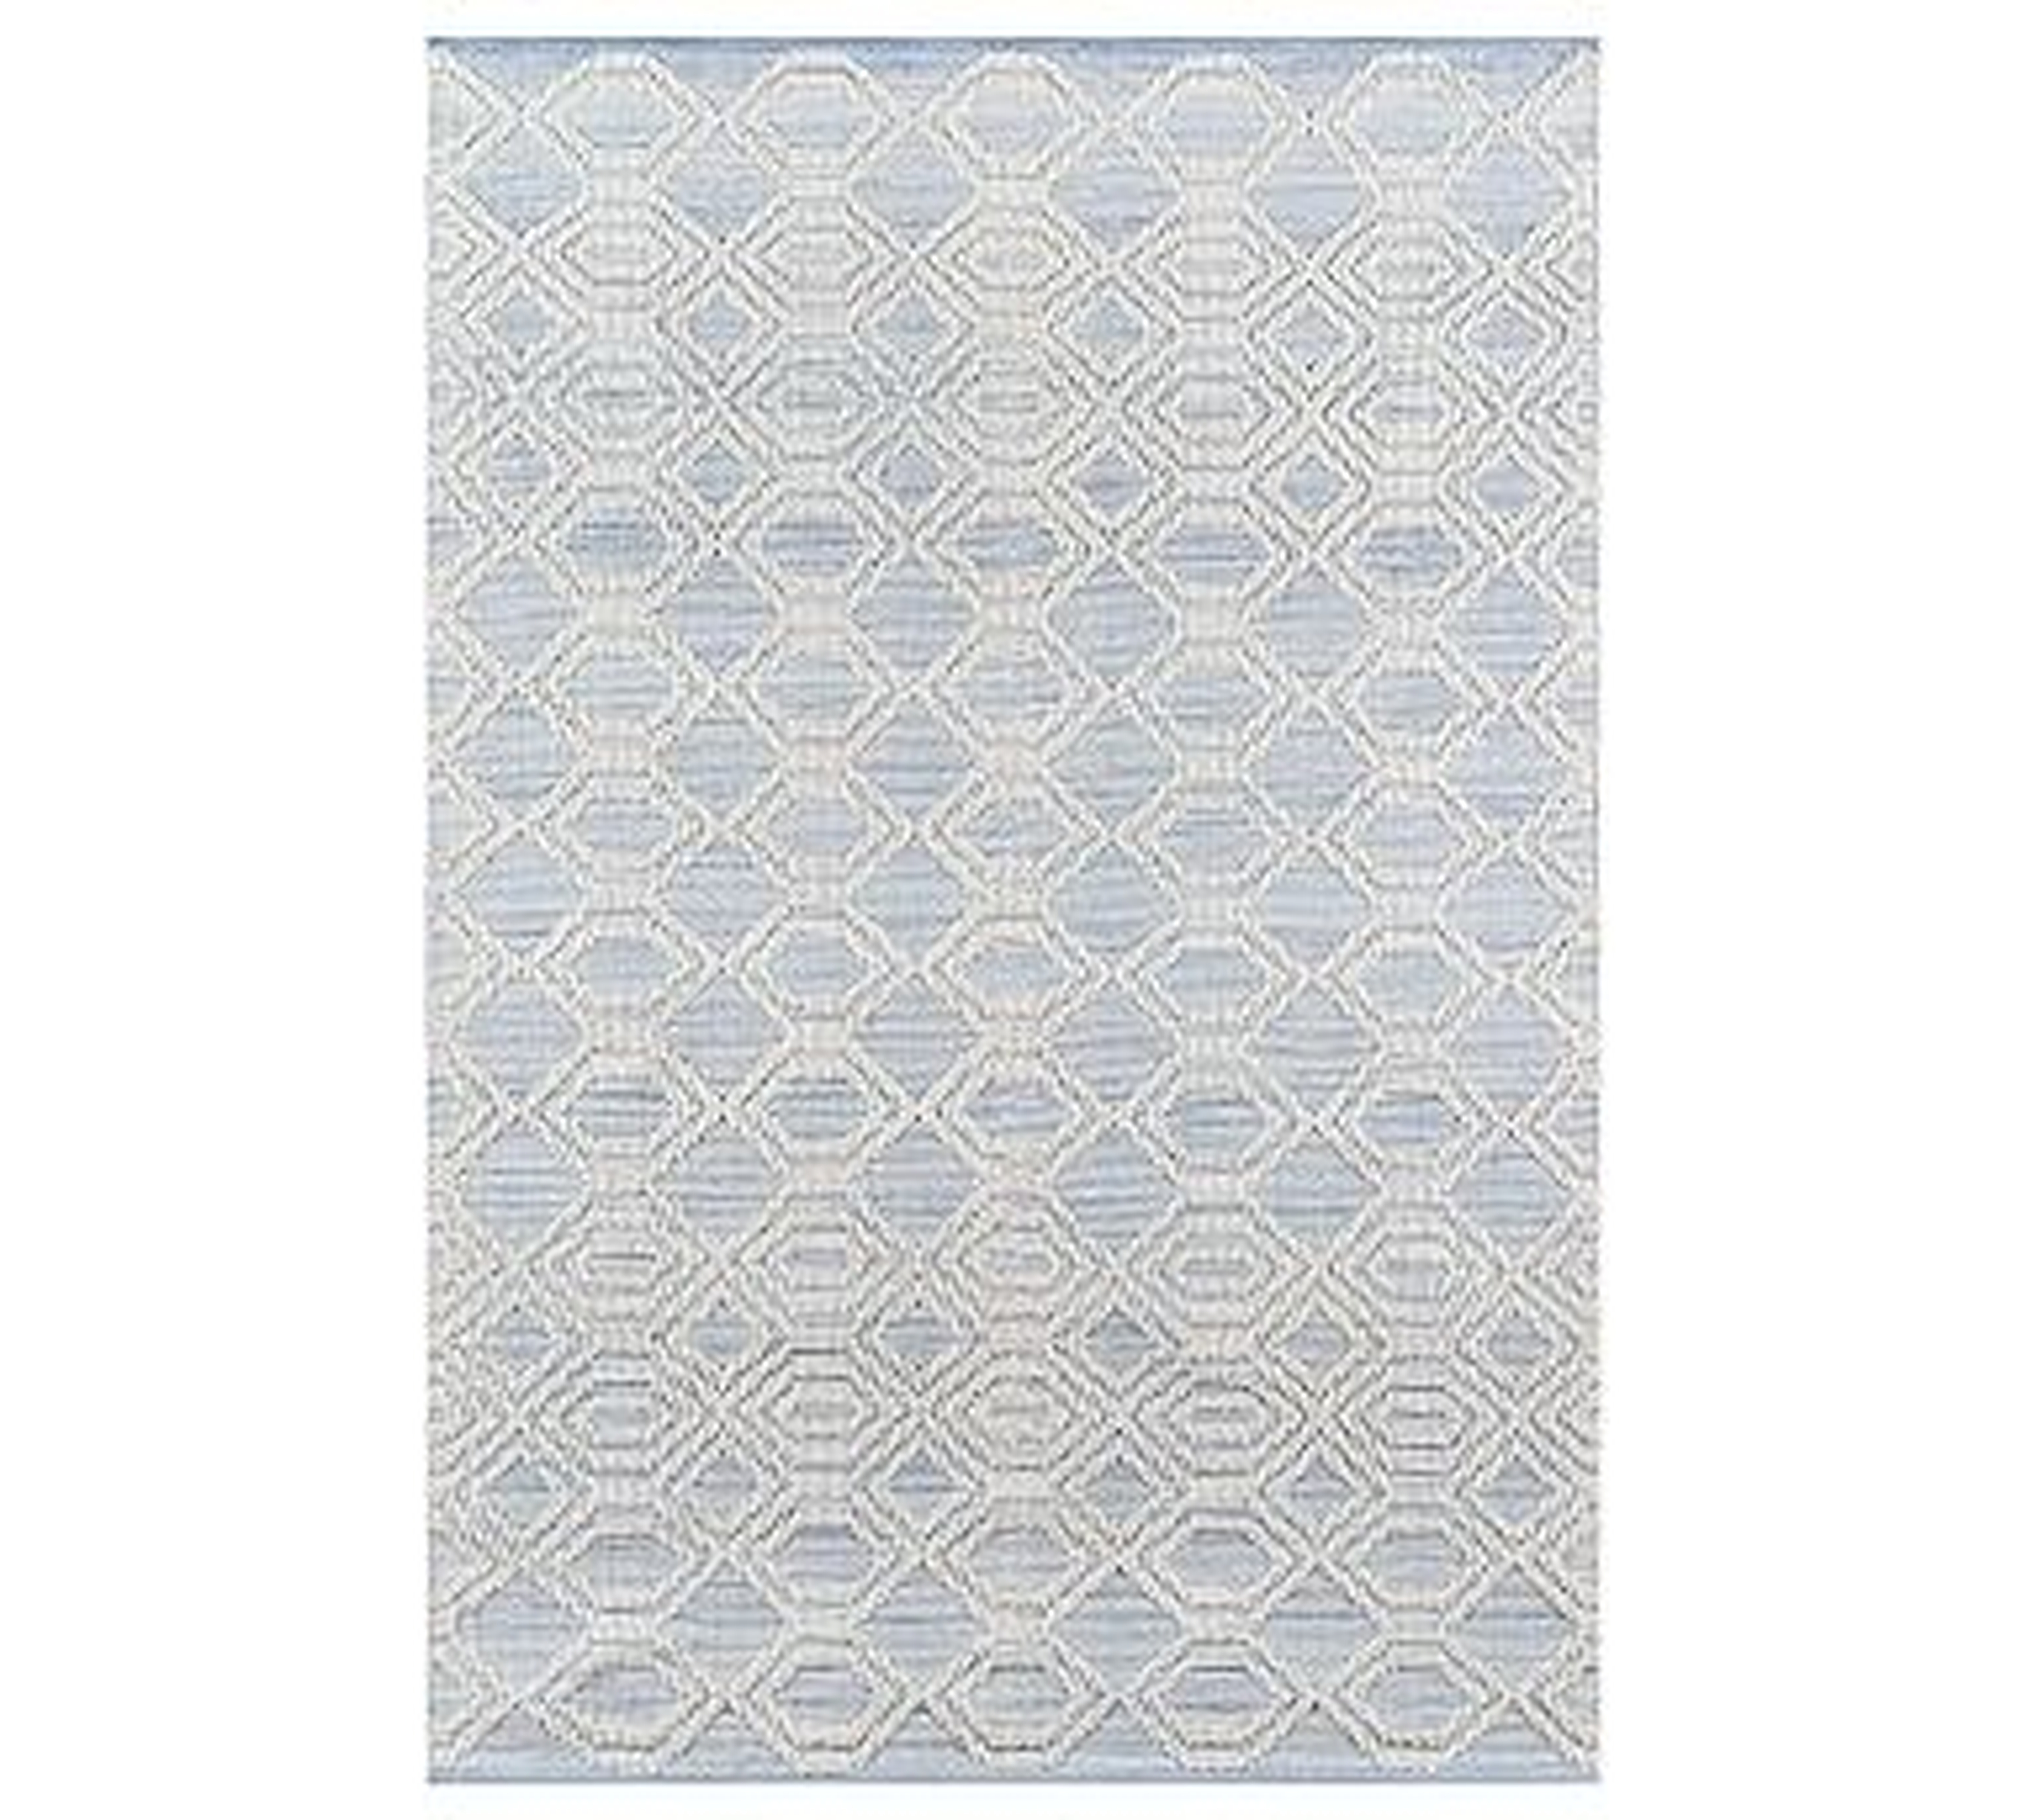 Theros Recycled Material Rug, 5 x 8', Light Blue - Pottery Barn